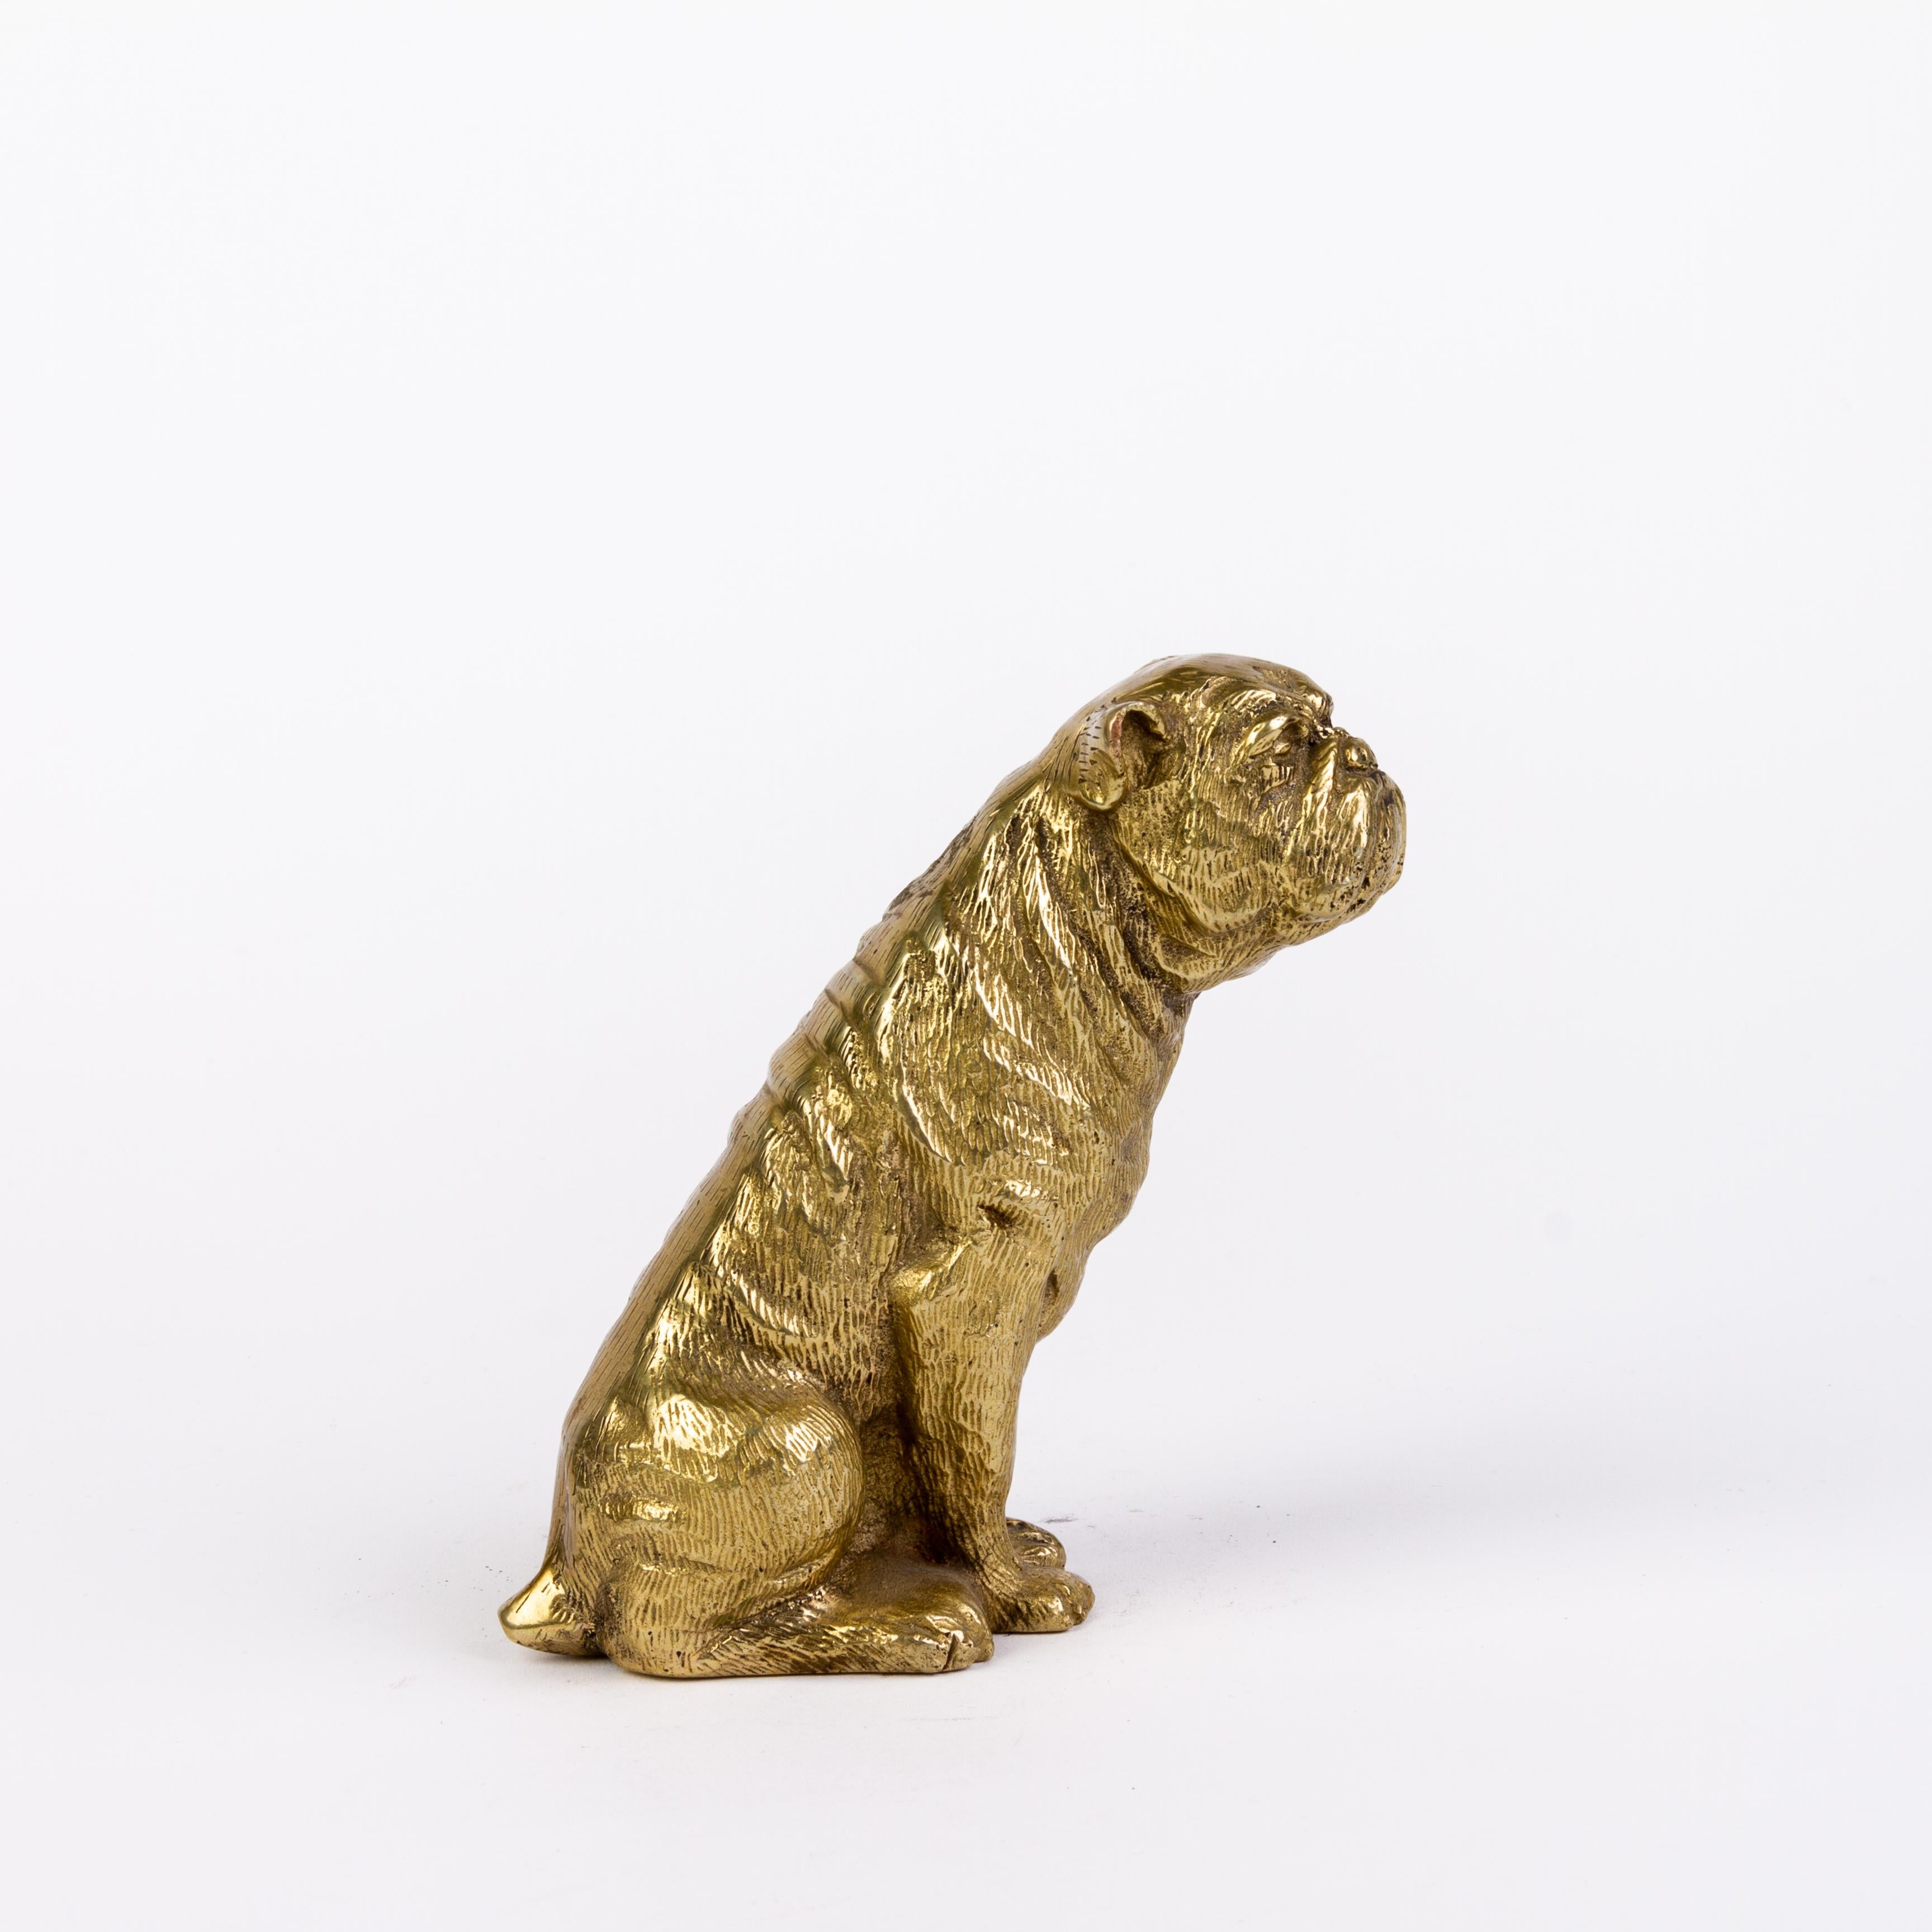 Victorian English Fine Brass Sculpture of a Bulldog 19th Century 
Good condition
From a private collection.
Free international shipping.